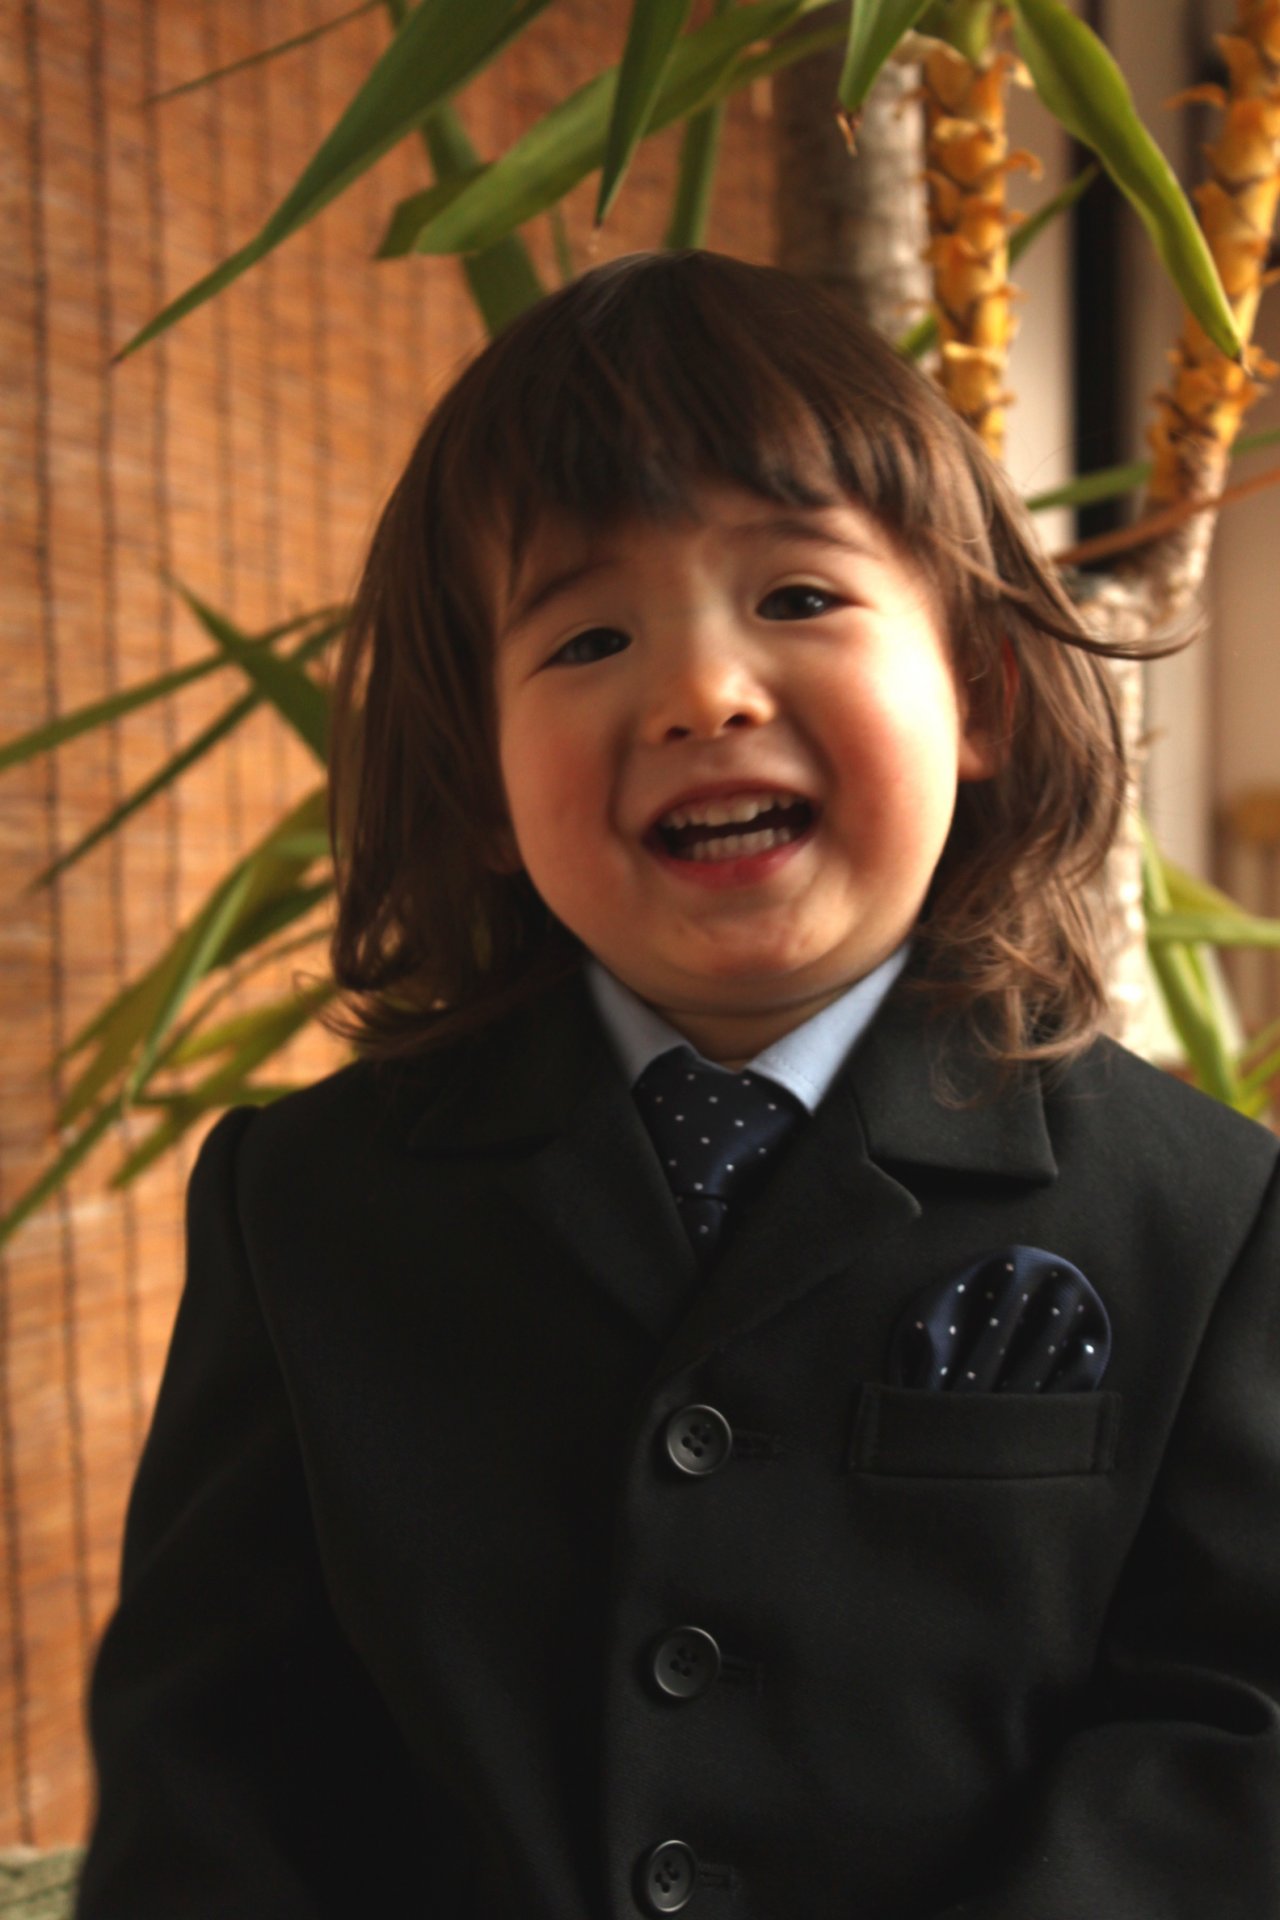 My son in a suit!